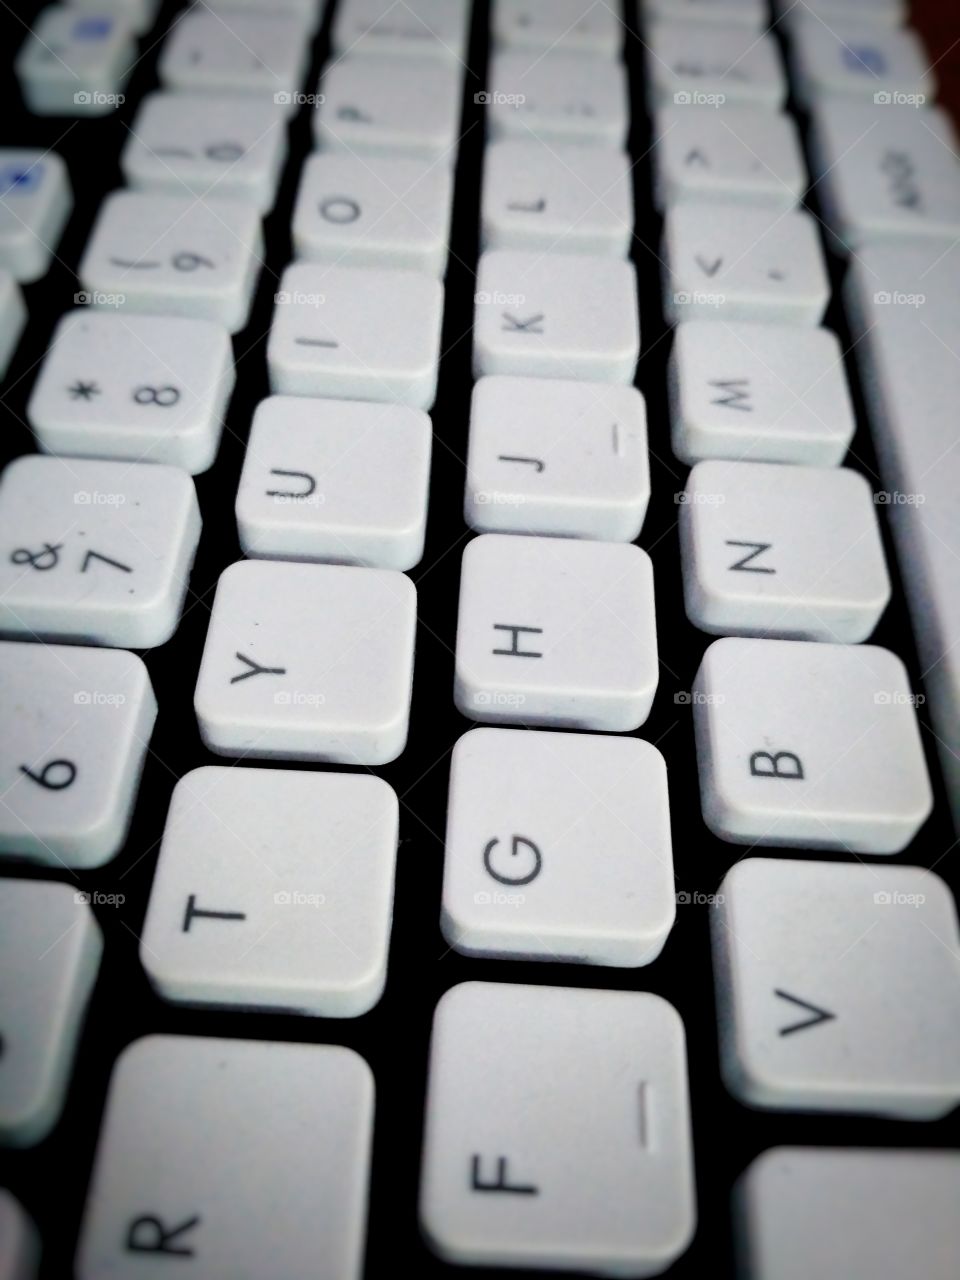 A computer keyboard picture usable at many places like photo background, android/ios application, etc.